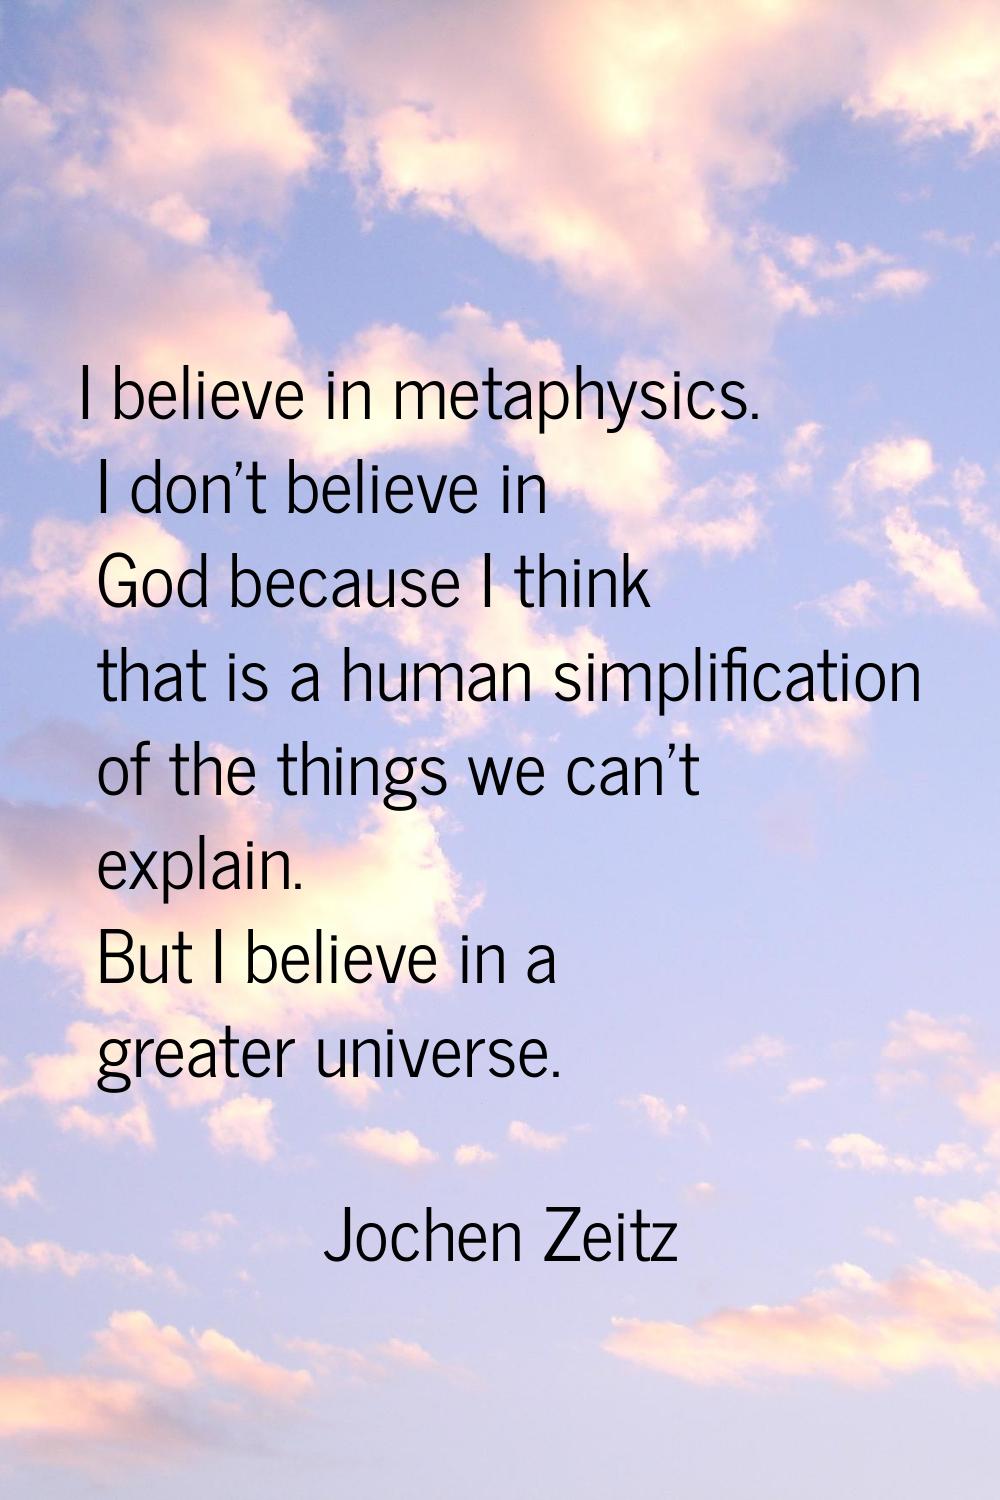 I believe in metaphysics. I don't believe in God because I think that is a human simplification of 